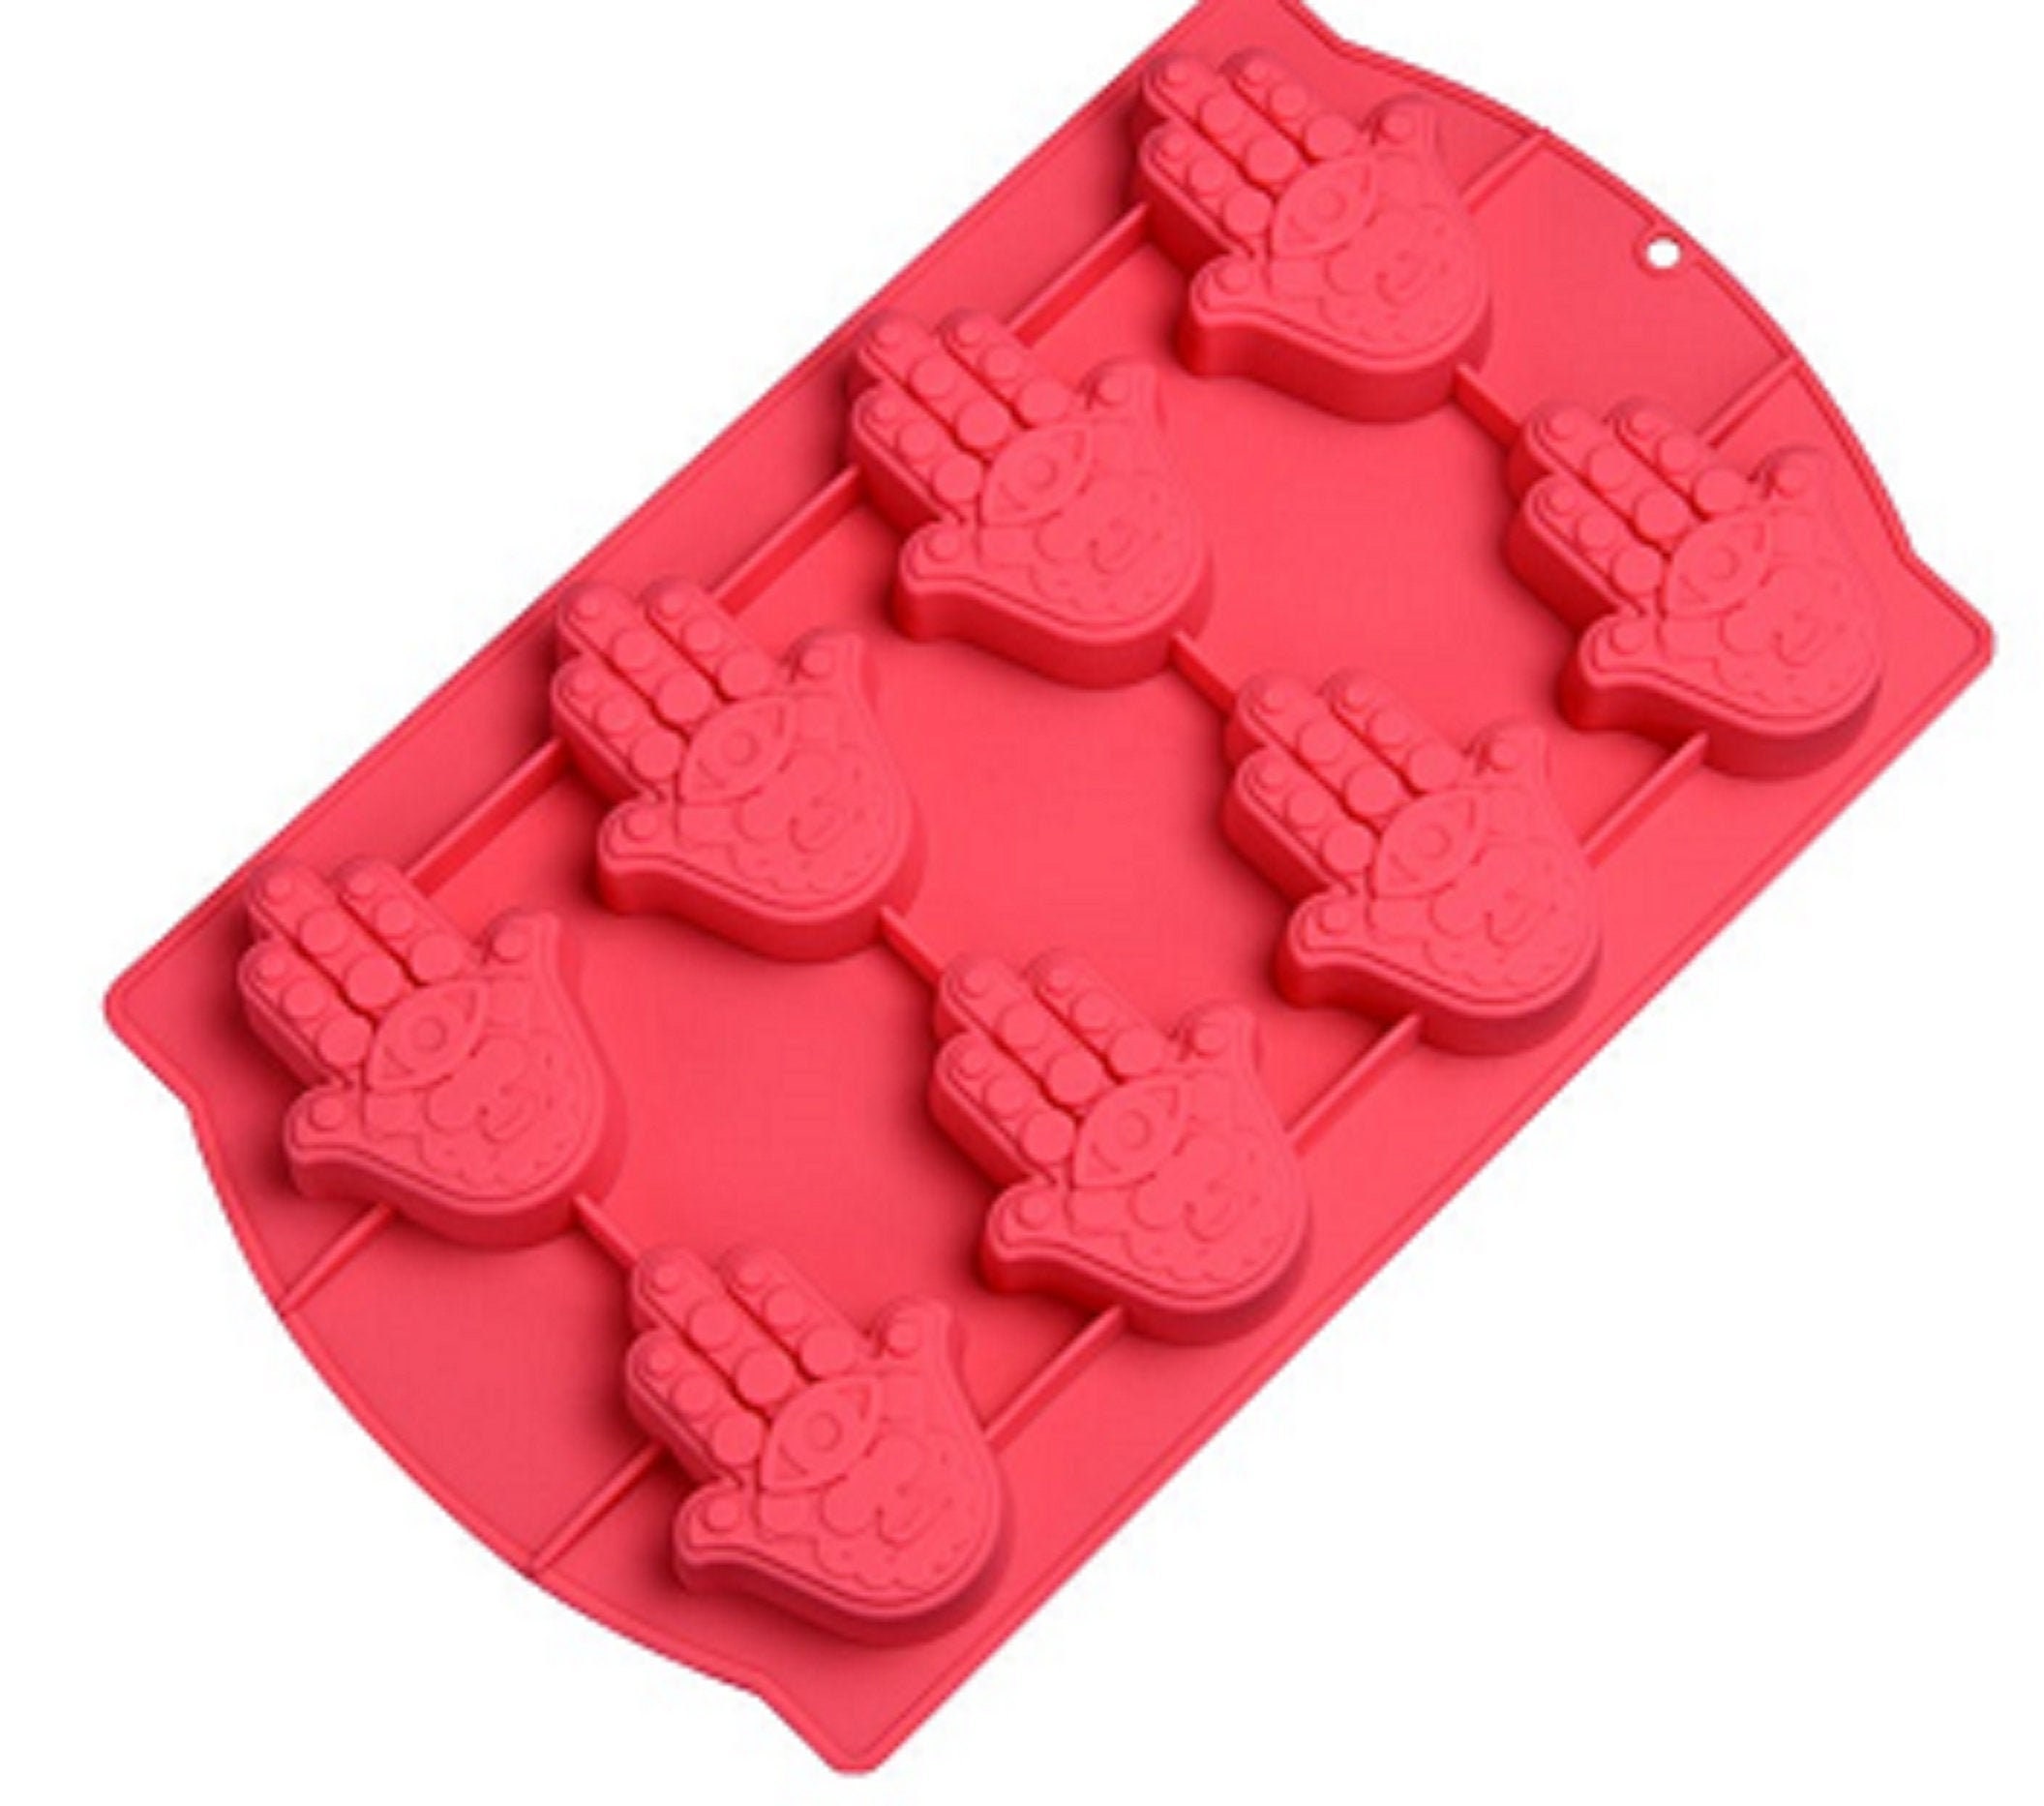 Holiday Theme Ice Cube Tray Candy Cane Gingerbread Men Christmas Party  Novelty Silicone Jello Chocolate Mold 